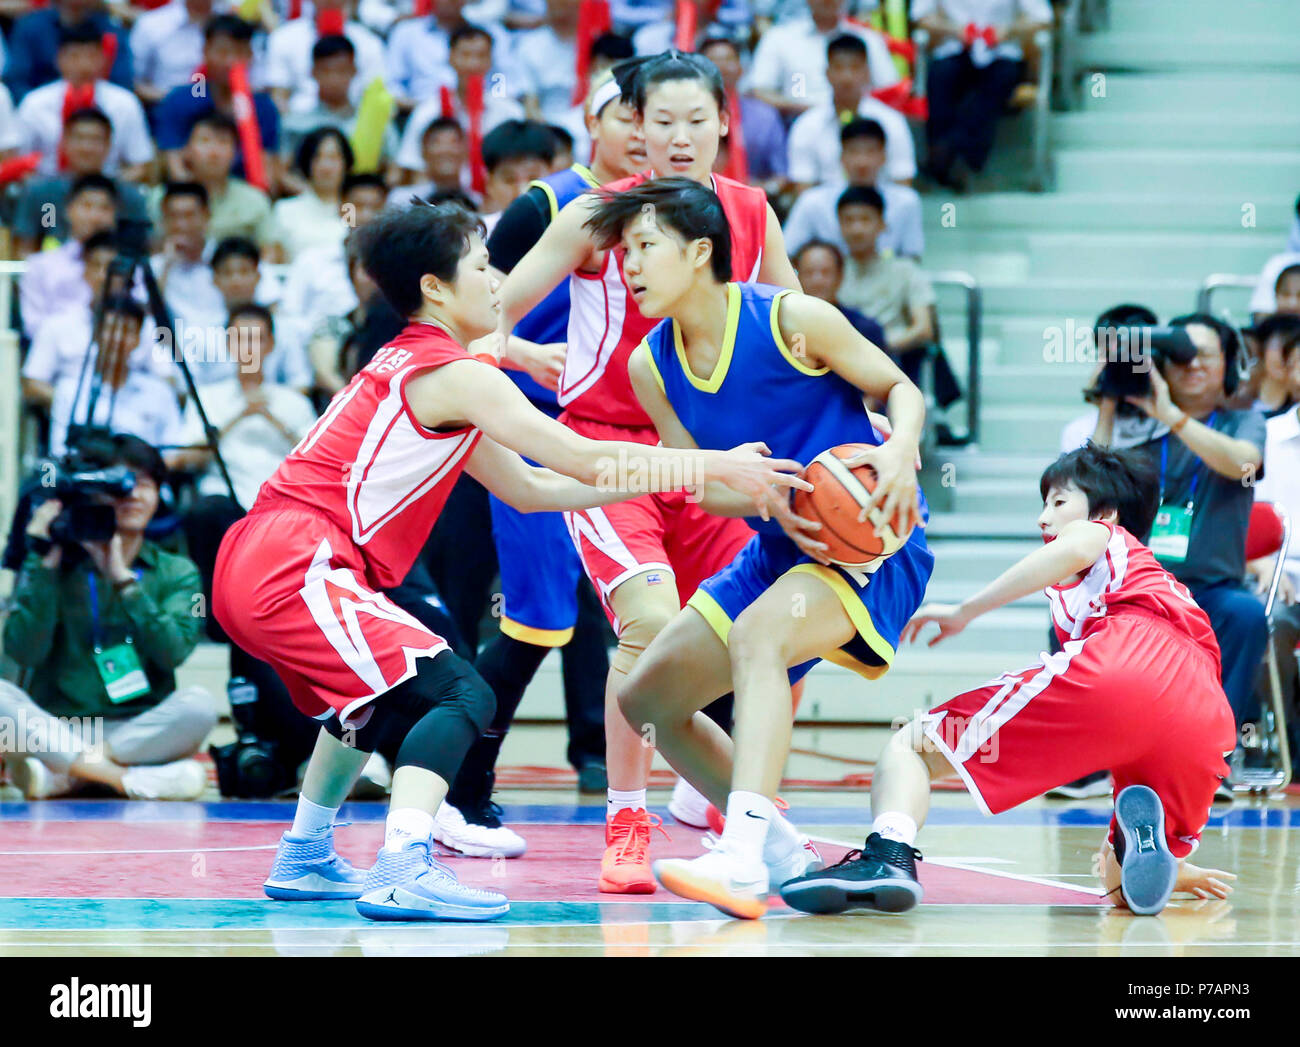 Inter-Korean friendly basketball match, July 5, 2018 : South Korea's Park Ji-Hyeon (C) in action during inter-Korean women's friendly basketball match at Ryugyong Chung Ju-yung Gymnasium in Pyongyang, North Korea. The 100-strong South Korean delegation of athletes, coaches, government officials and journalists arrived in Pyongyang on July 3 for the matches which have not been held in 15 years. Credit: Press Pool in Pyeongyang/AFLO/Alamy Live News Stock Photo